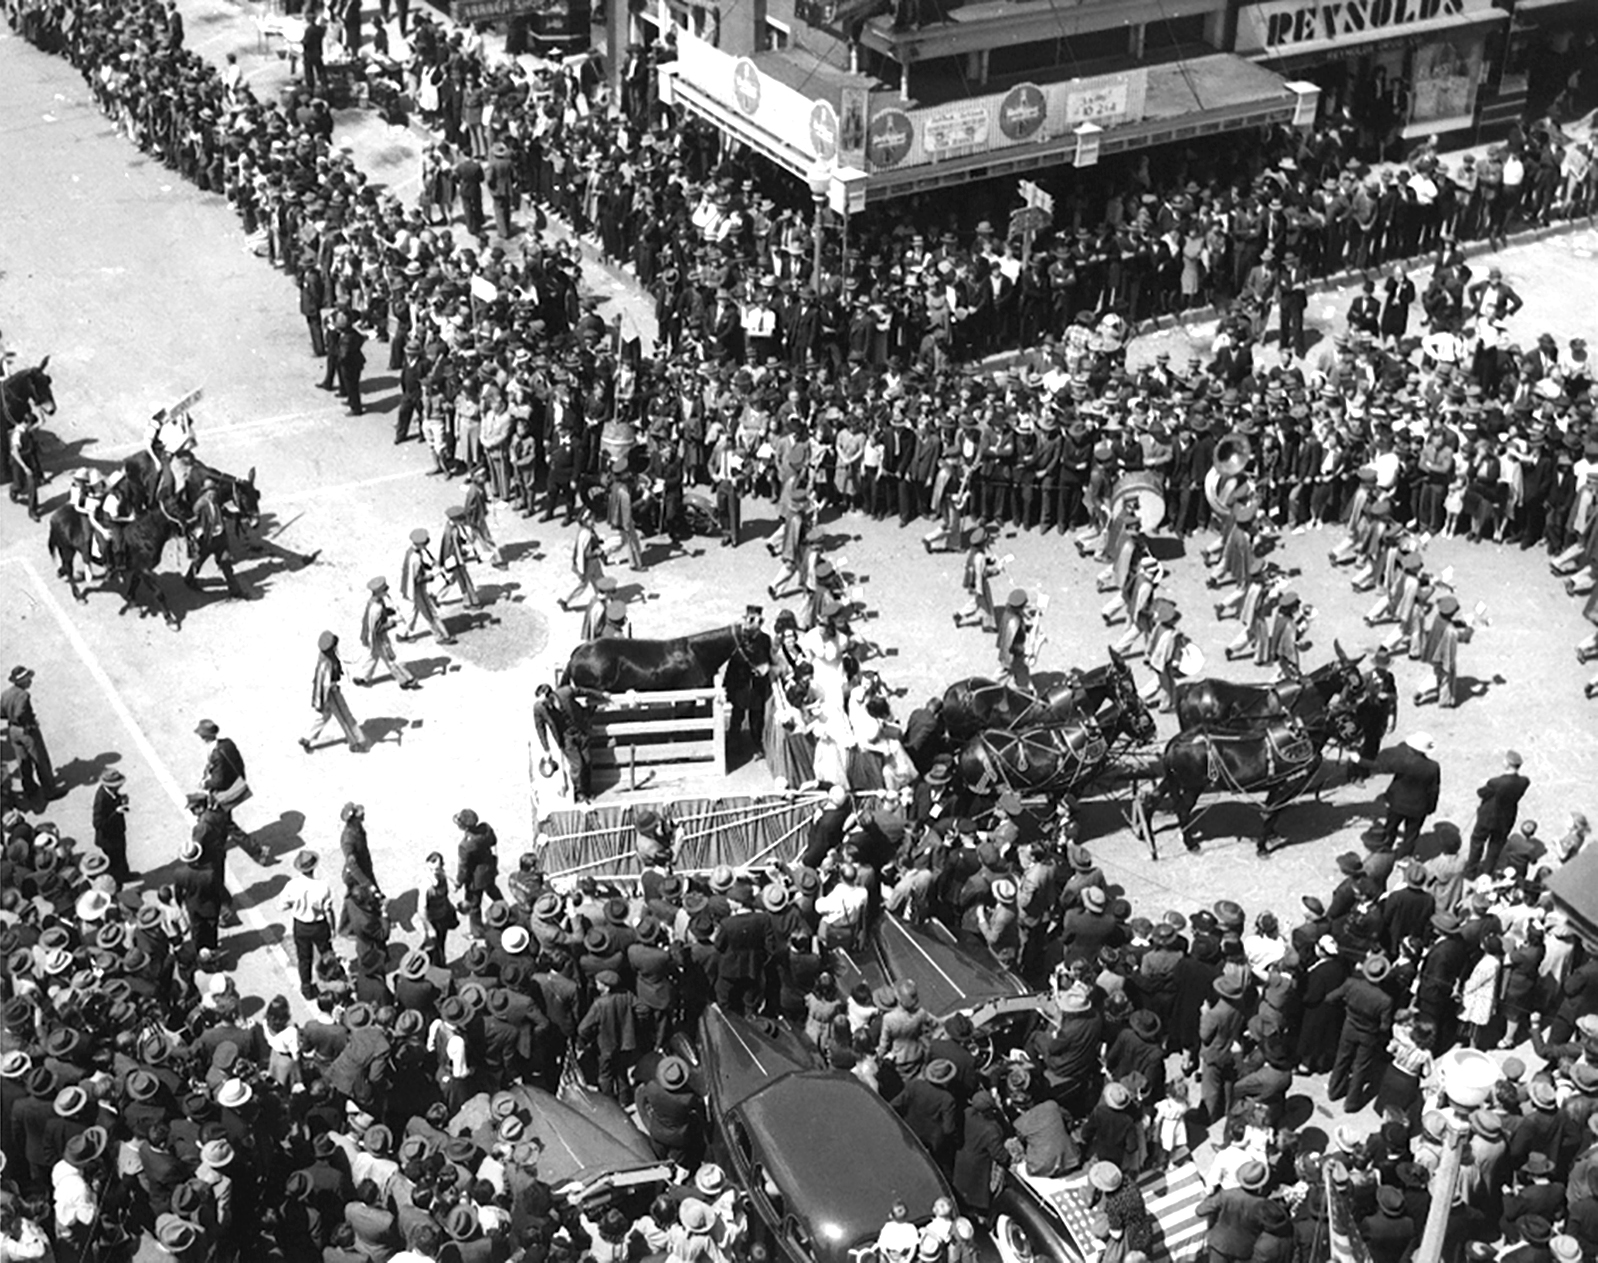 Historical black and white photo, high vantage point view of the Mule Day parade in downtown Columbia, TN